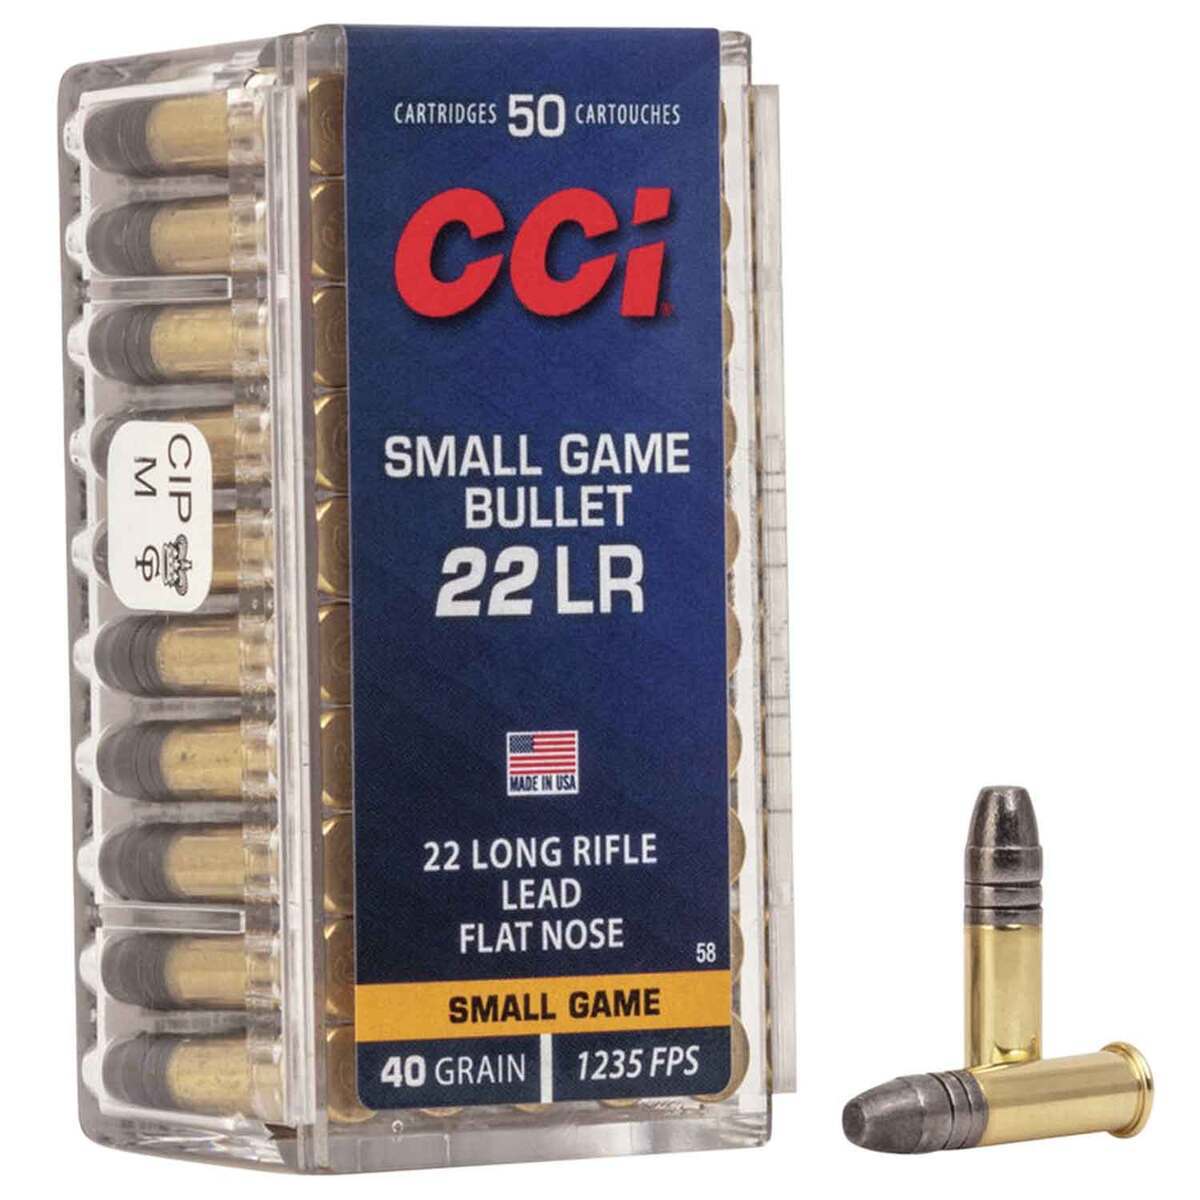 CCI Small Game Bullet 22 LR 40gr LFN Rimfire Ammo - 50 Rounds ...